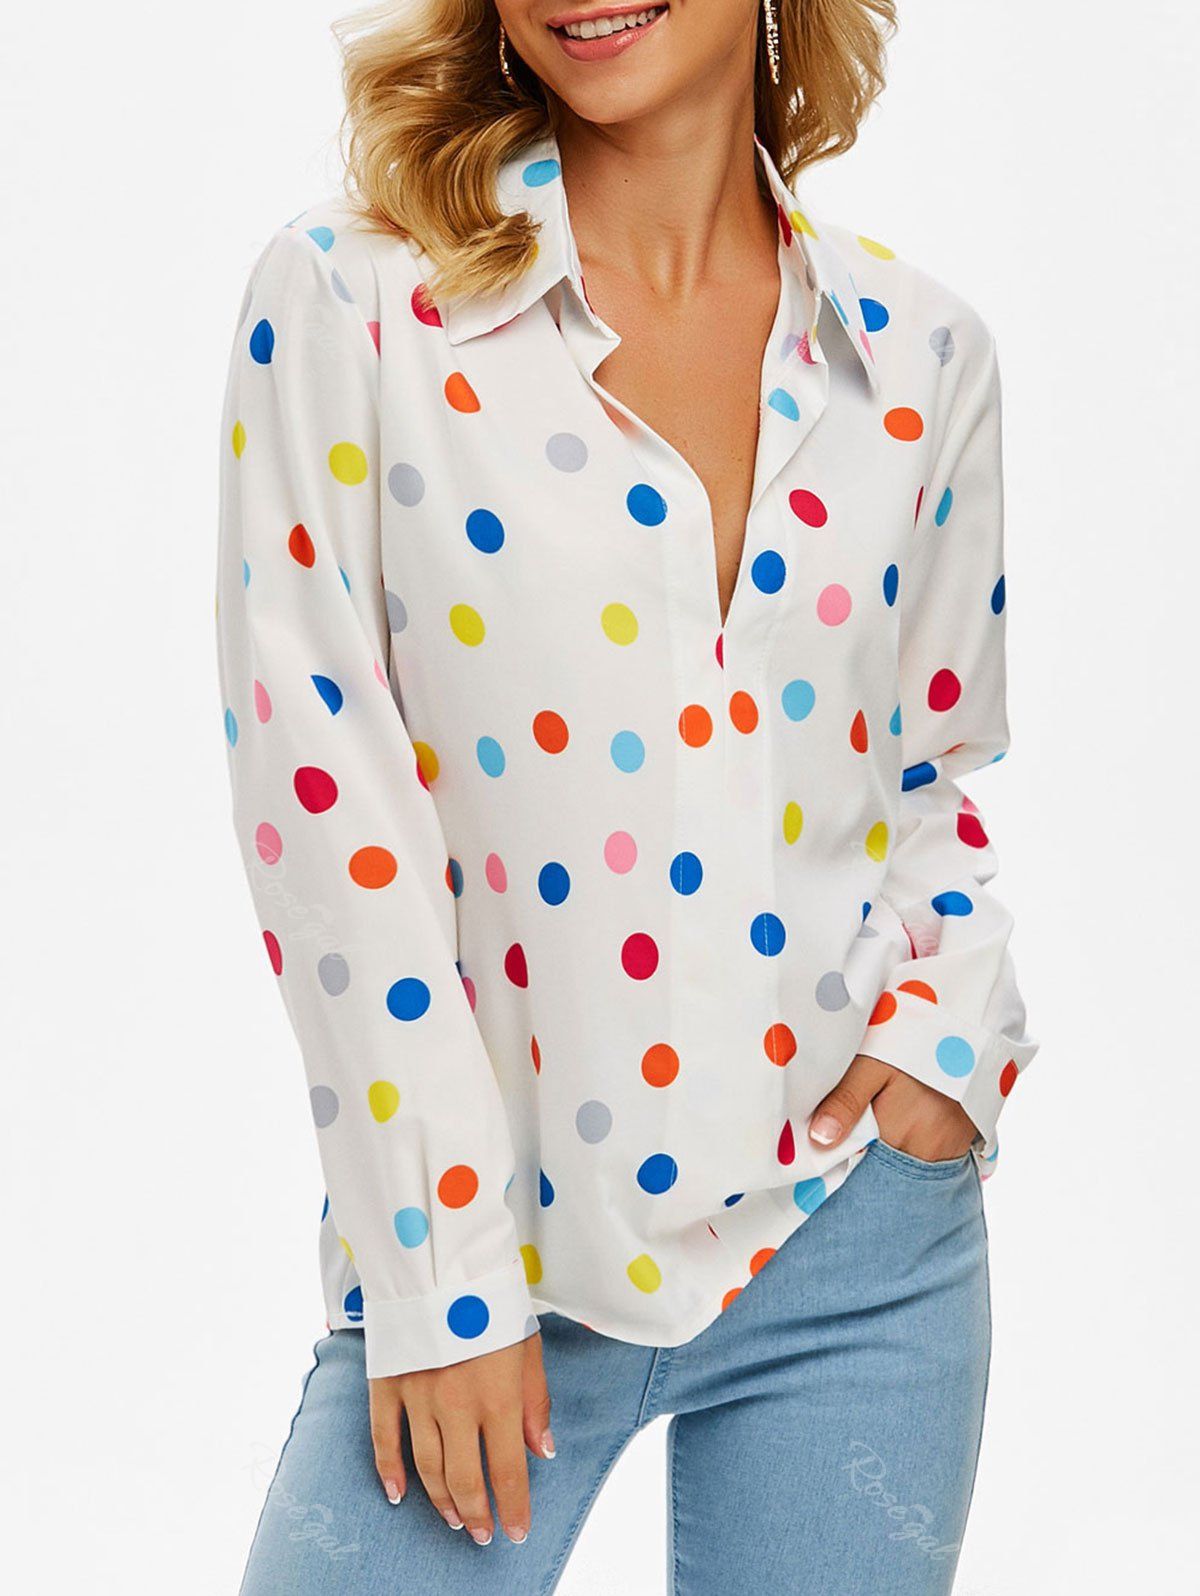 New Plunging Polka Dot Blouse  